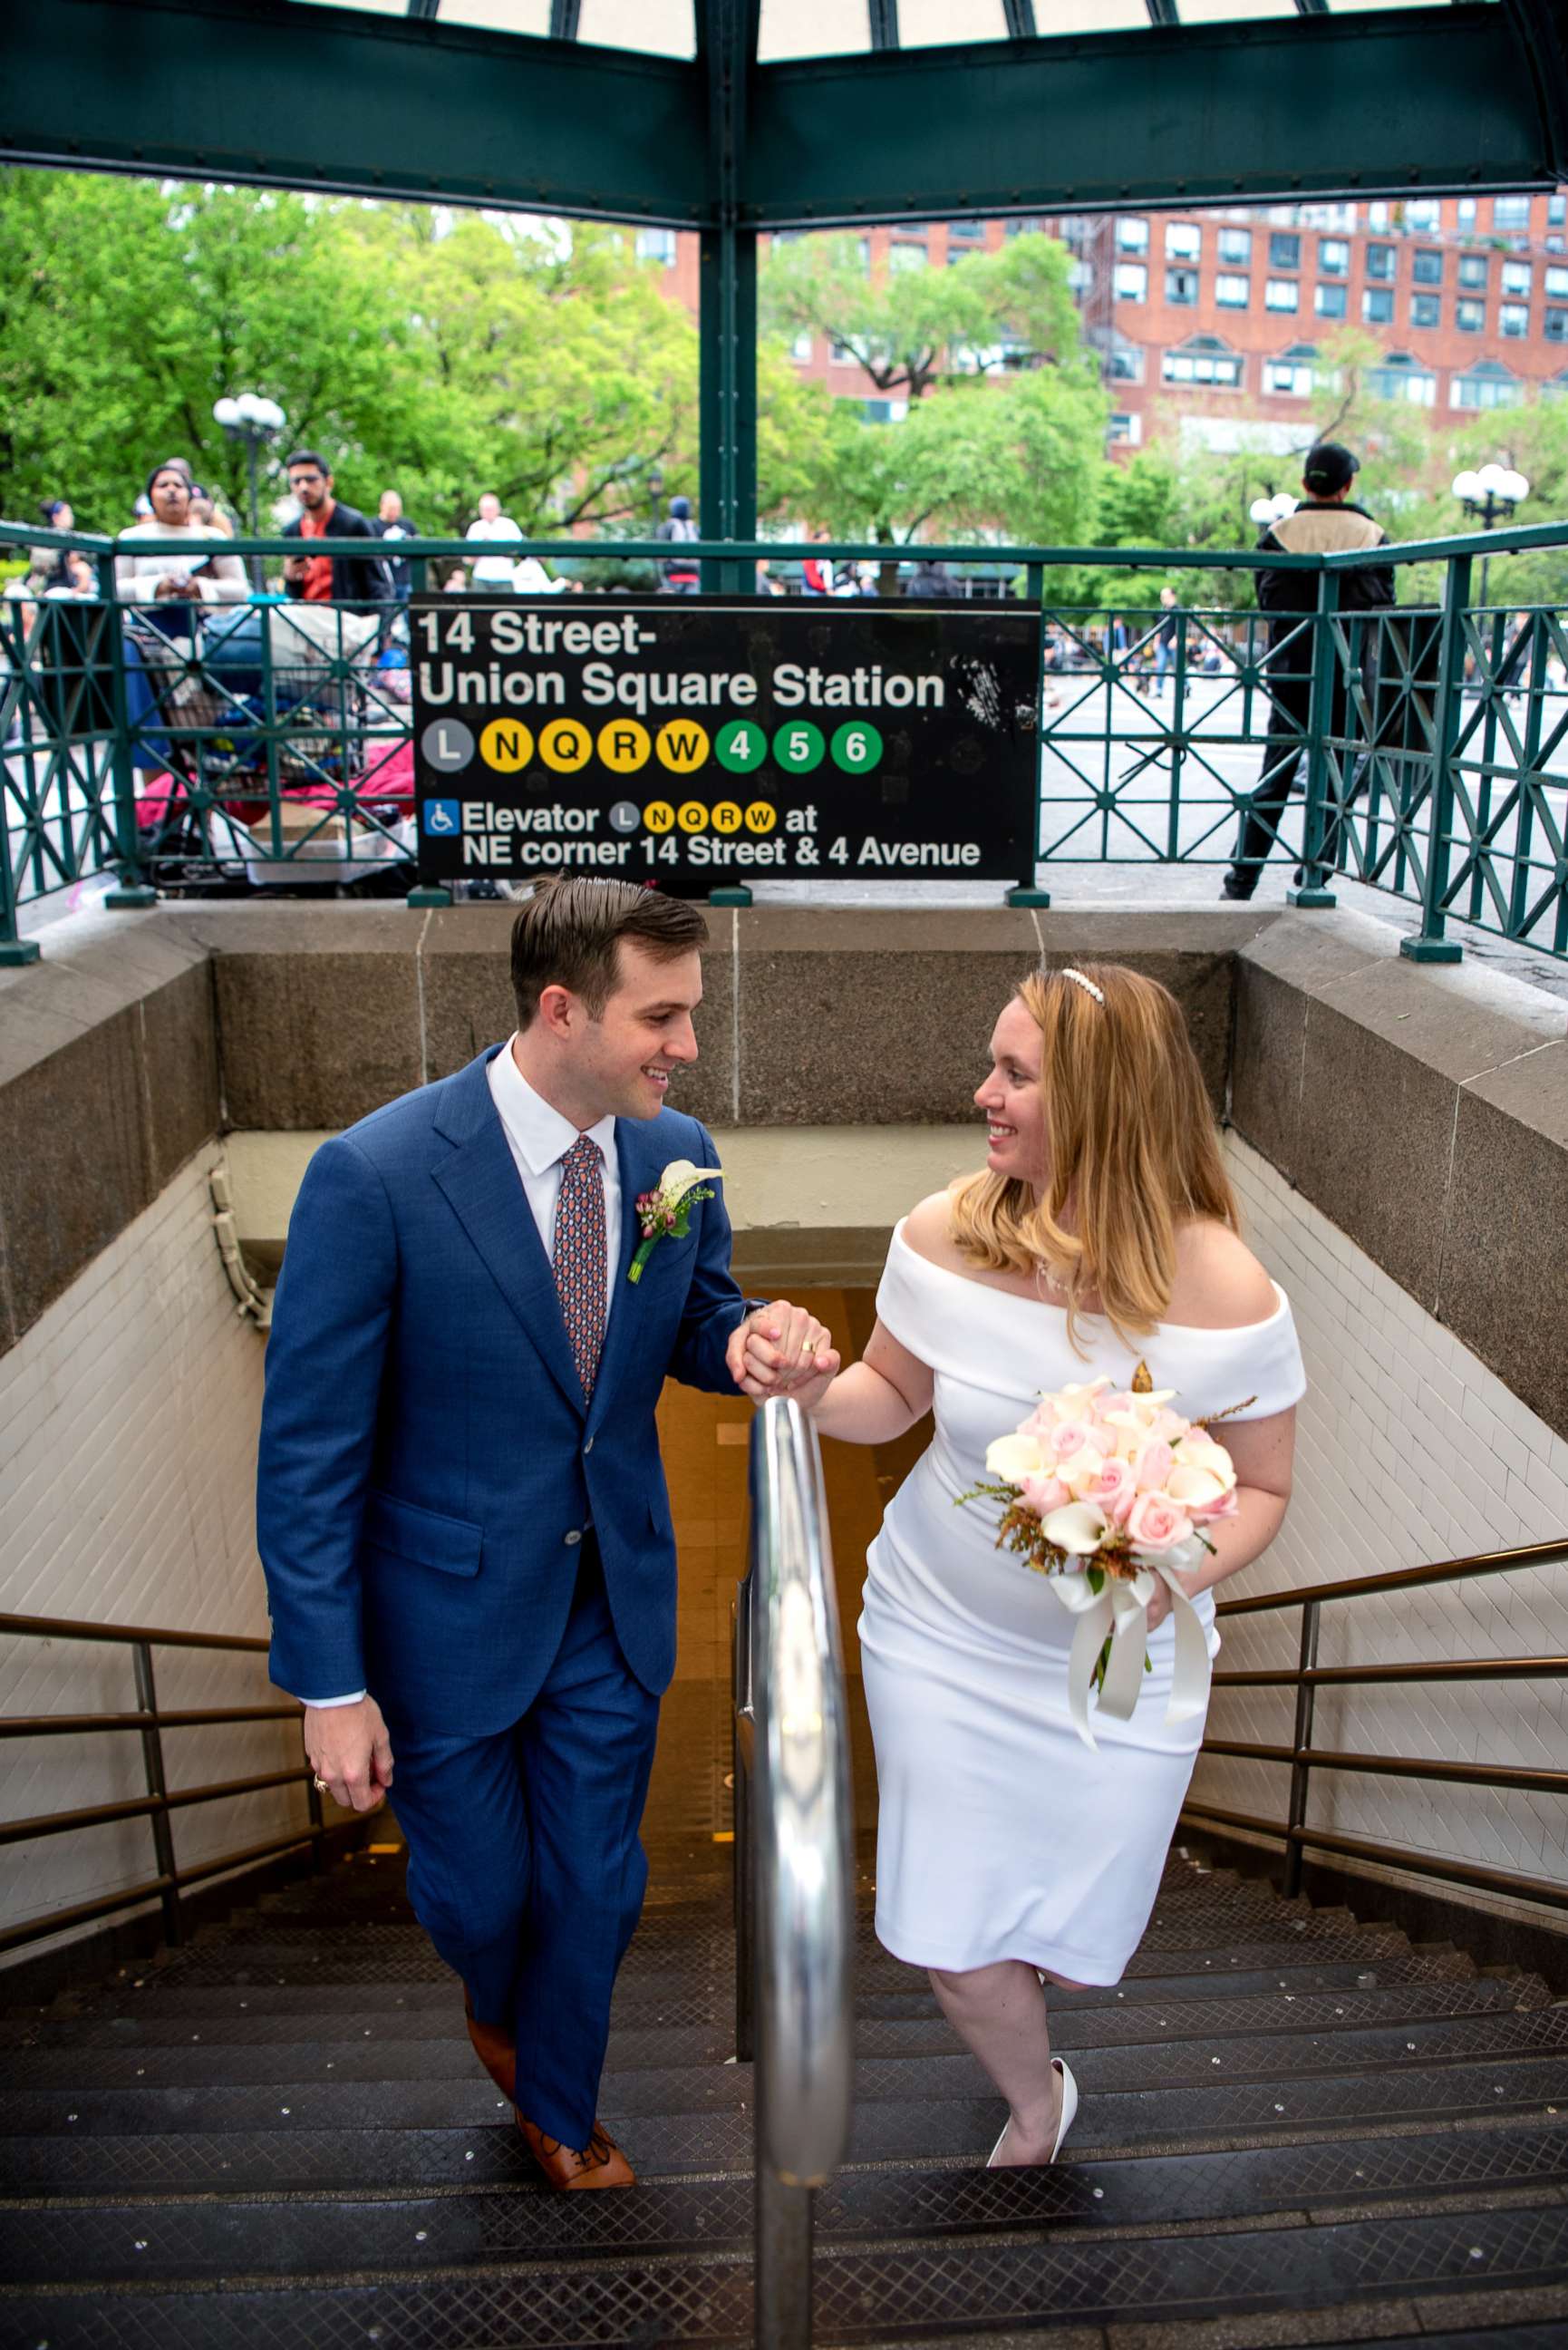 PHOTO: Newlyweds Robert Musso and Frances Denmark exit the subway in New York City following their ceremony.